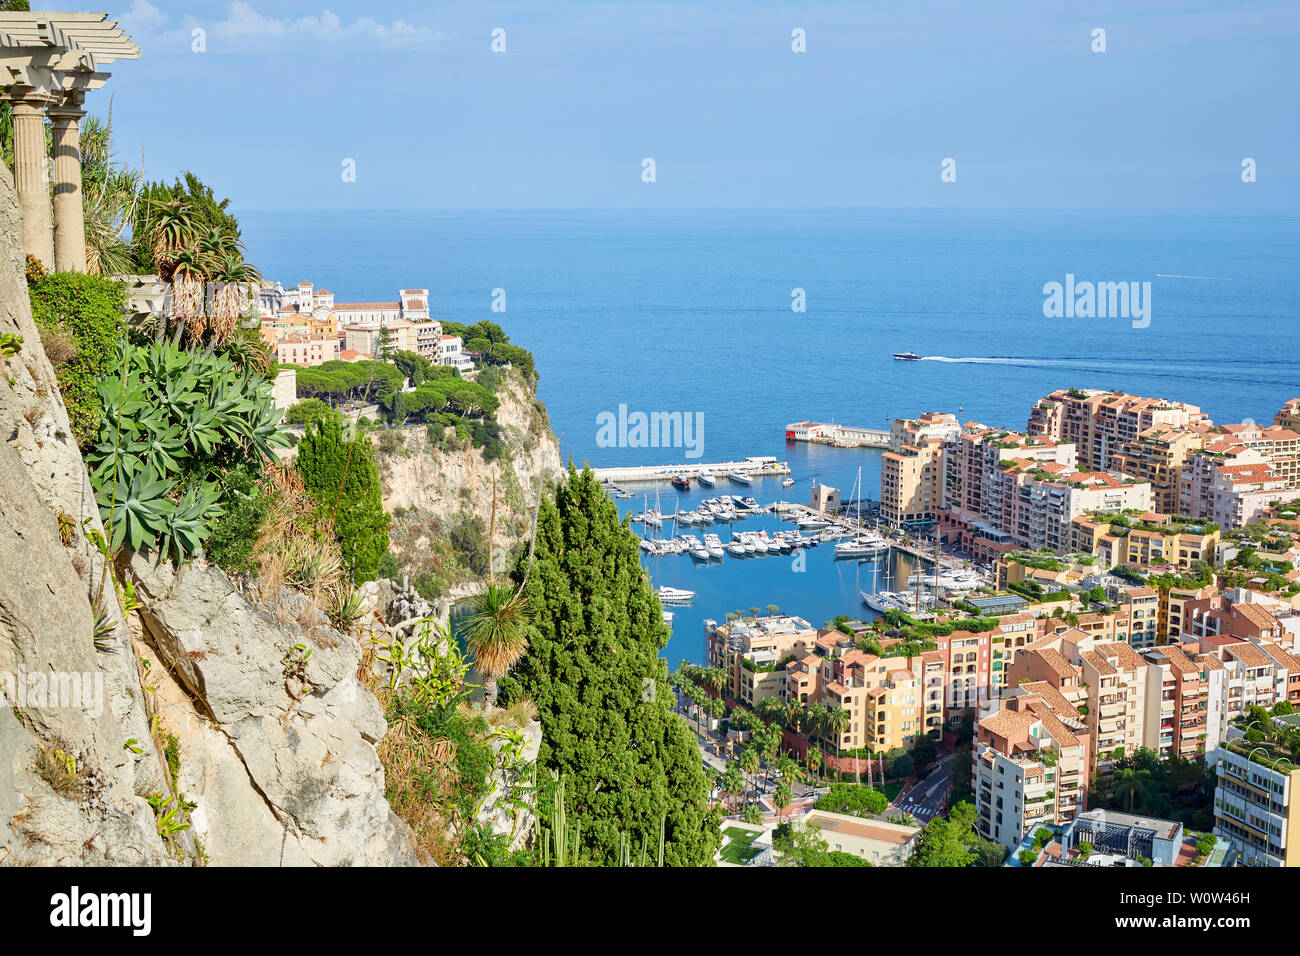 MONTE CARLO, MONACO - AUGUST 20, 2016: Monte Carlo city view and cliff with mediterranean vegetation in a sunny summer day, clear blue sky in Monte Ca Stock Photo